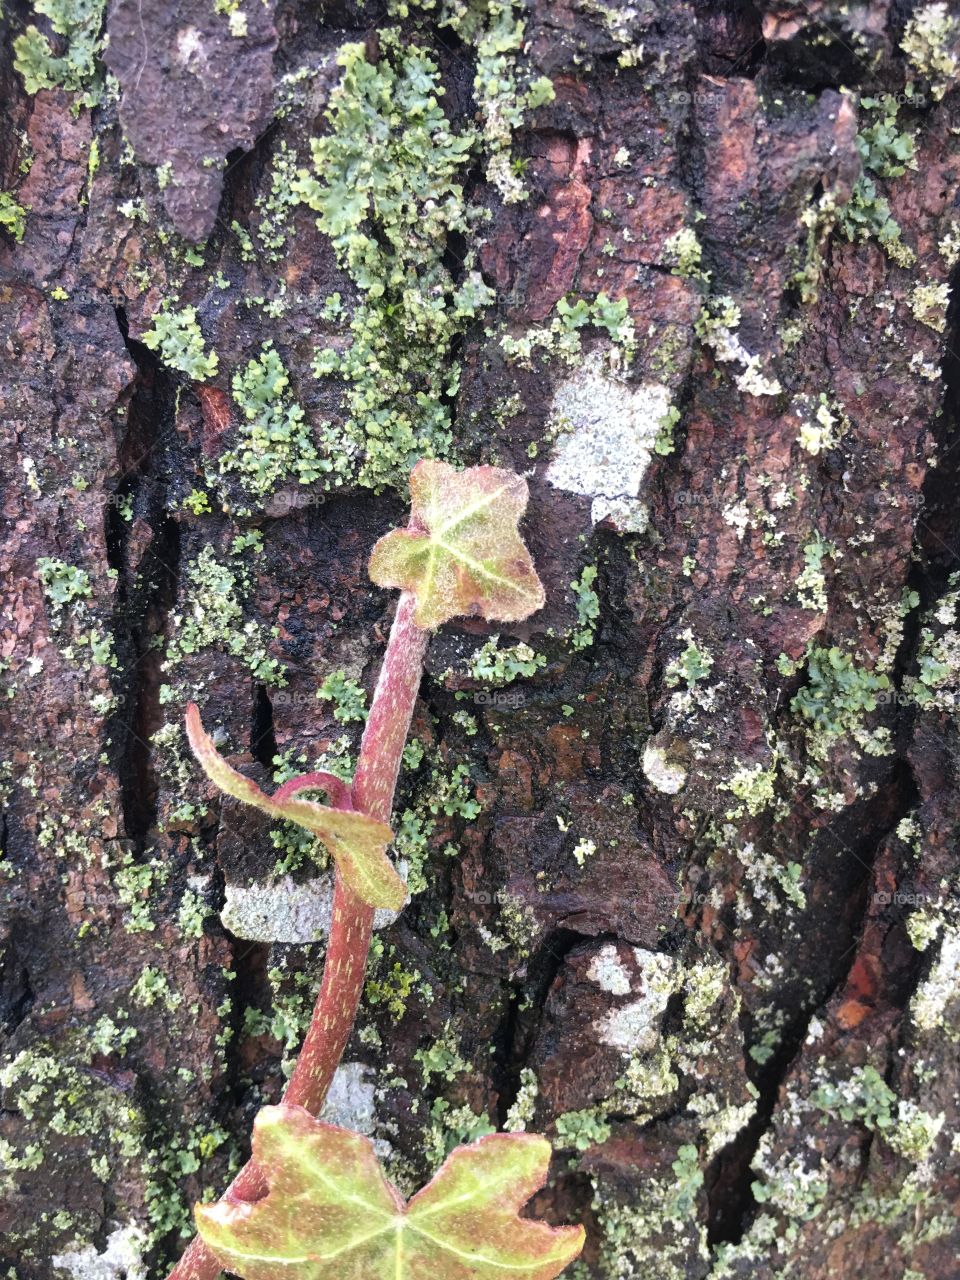 Spring ivy tendril growing on the mossy bark of an oak tree